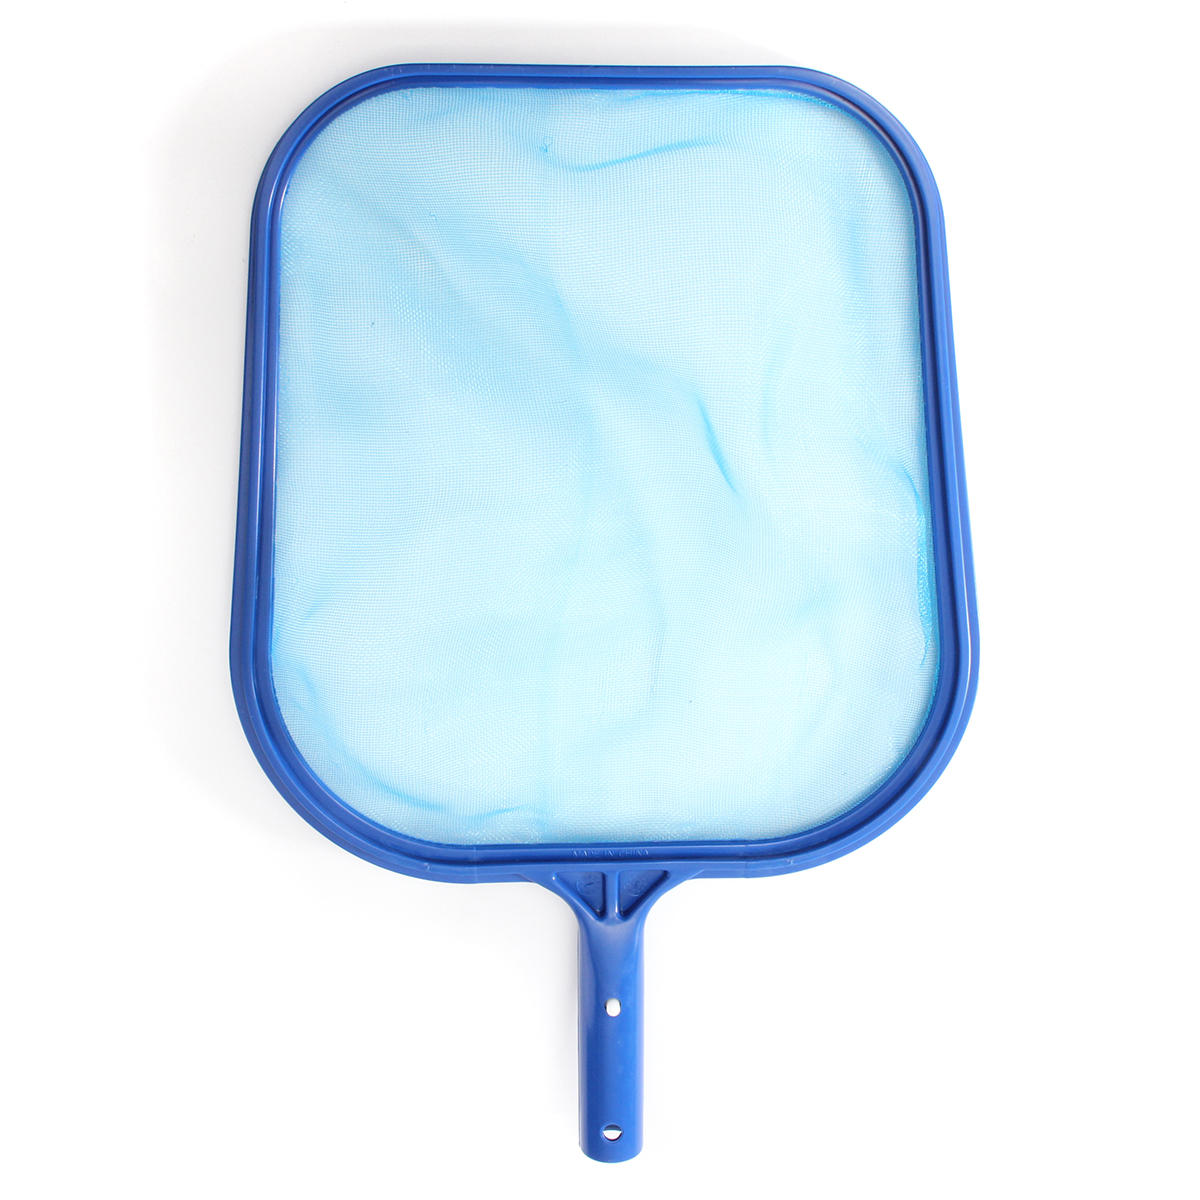 Leaf Net Skimmer Rake Replacement Mesh Cleaning Tool for Swimming Spa Pool Tub